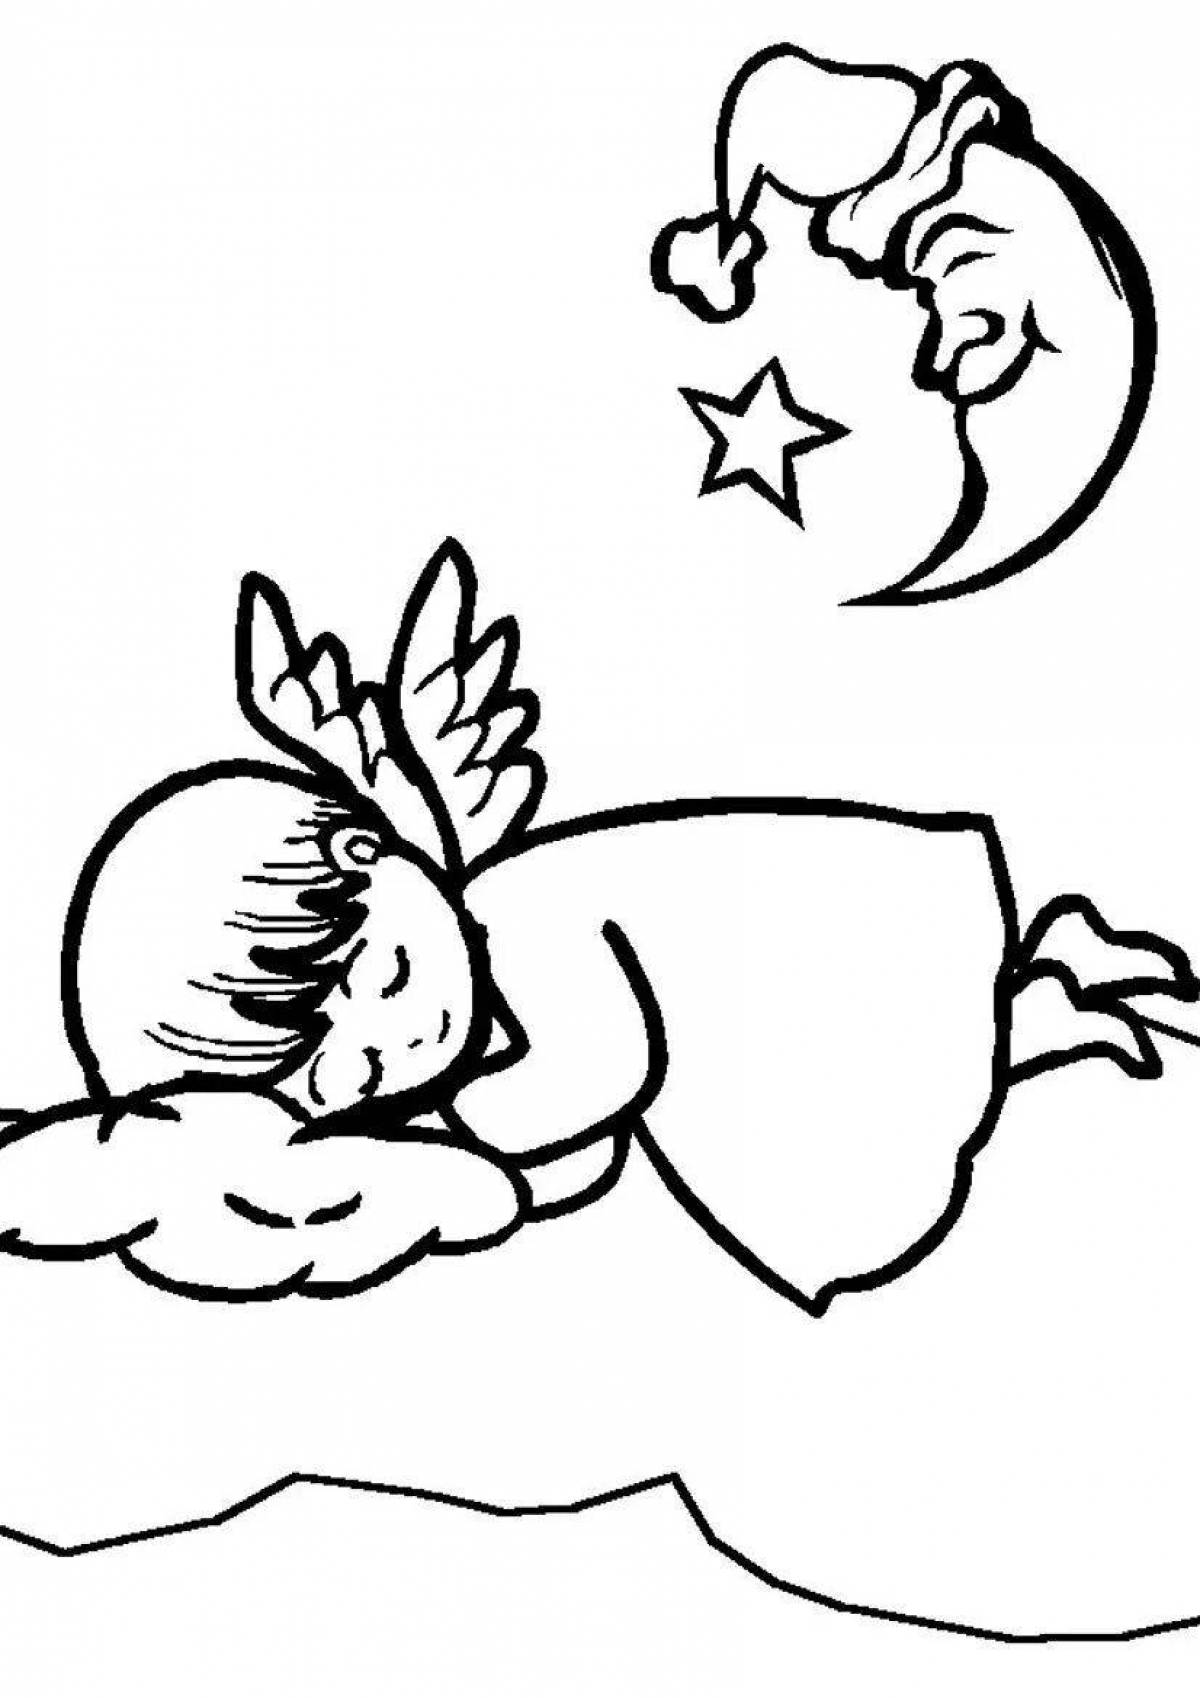 Coloring page nice children are sleeping